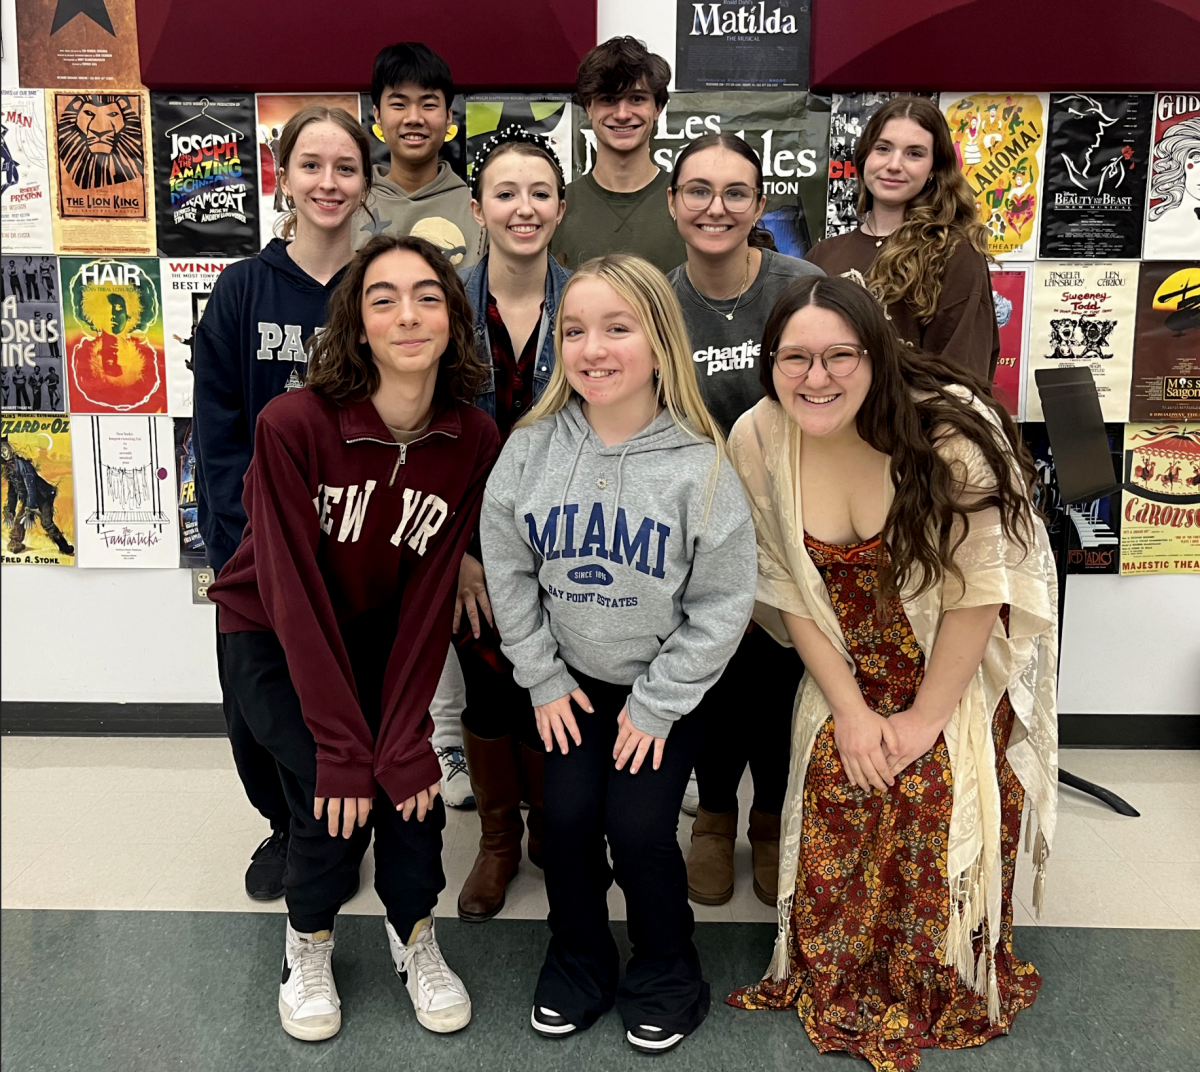 Eleven+West+Essex+music+students+were+named+to+Region+ensembles.+From+left%3A+%28front+row%29+Daniel+Viola%2C+Emma+Casper+and+Noel+Marootian%3B+%28middle+row%29+Charlotte+Casazza%2C+Delaney+Piccoli+and+Luciana+Musano%3B+%28back+row%29+Kai-an+Tsai%2C+Aidan+Leifer+and+Madison+Neer+%28Not+pictured%3A+Miles+Schmidt+and+Lexi+Ciardella%29.